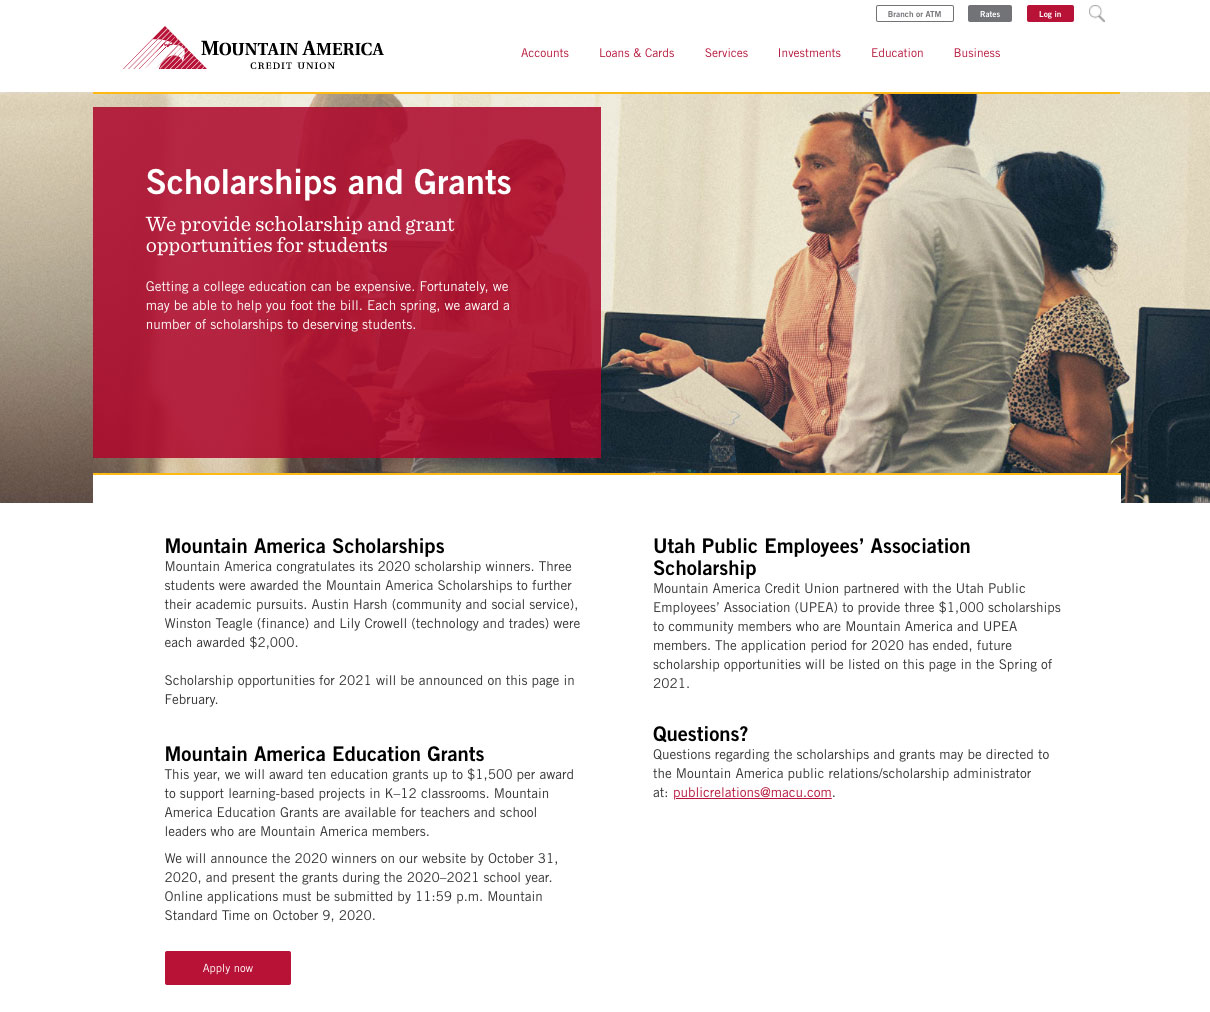 MACU Scholarships & Grants Page